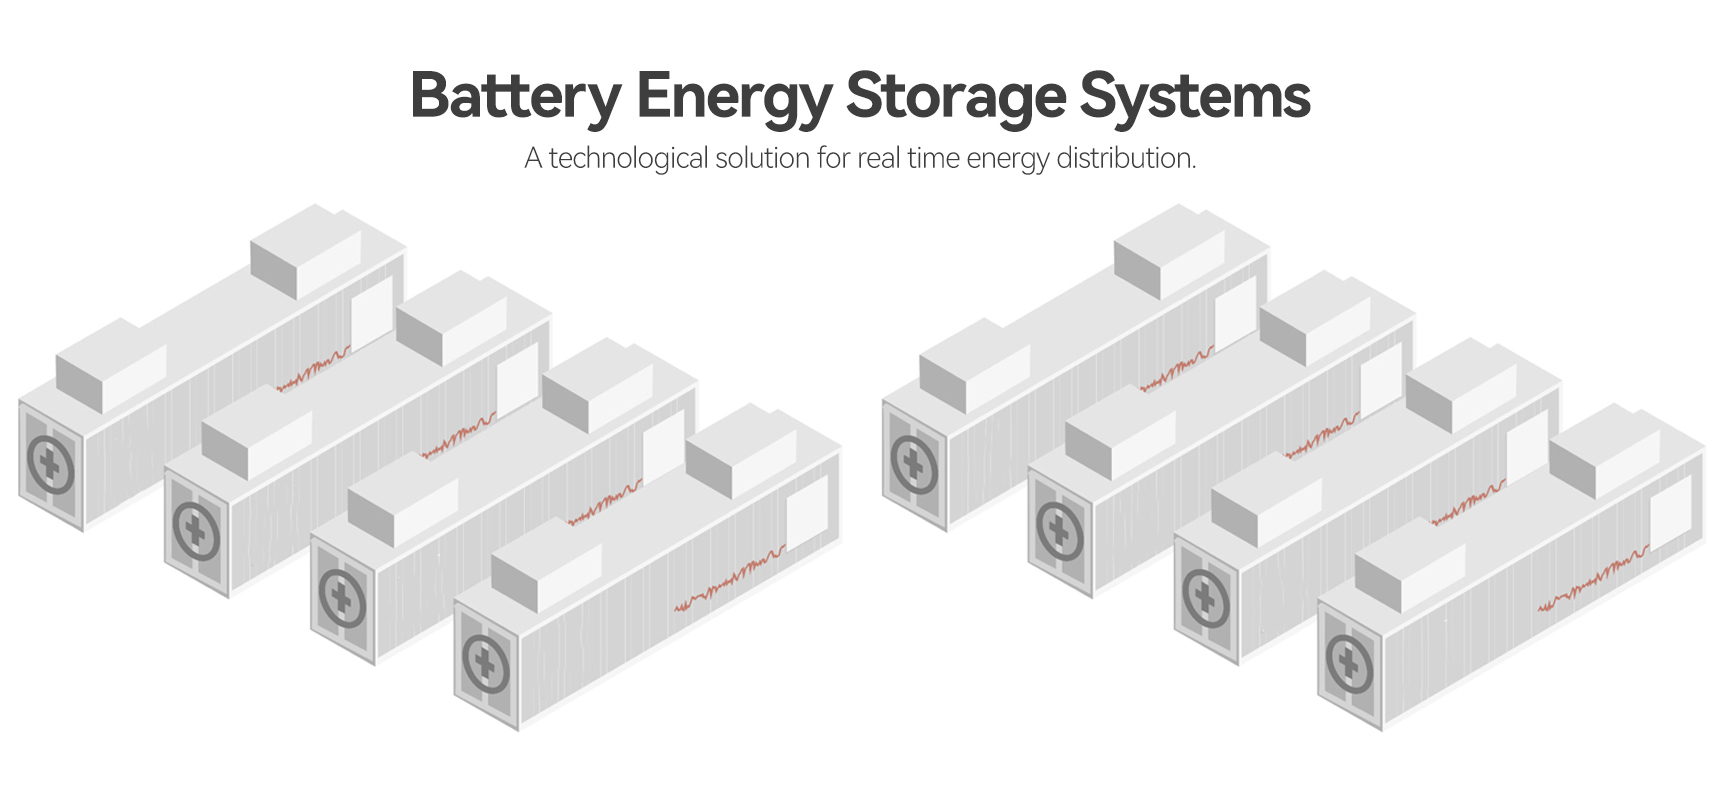 Battery Energy Storage Systems – a technological solution for real time energy distribution